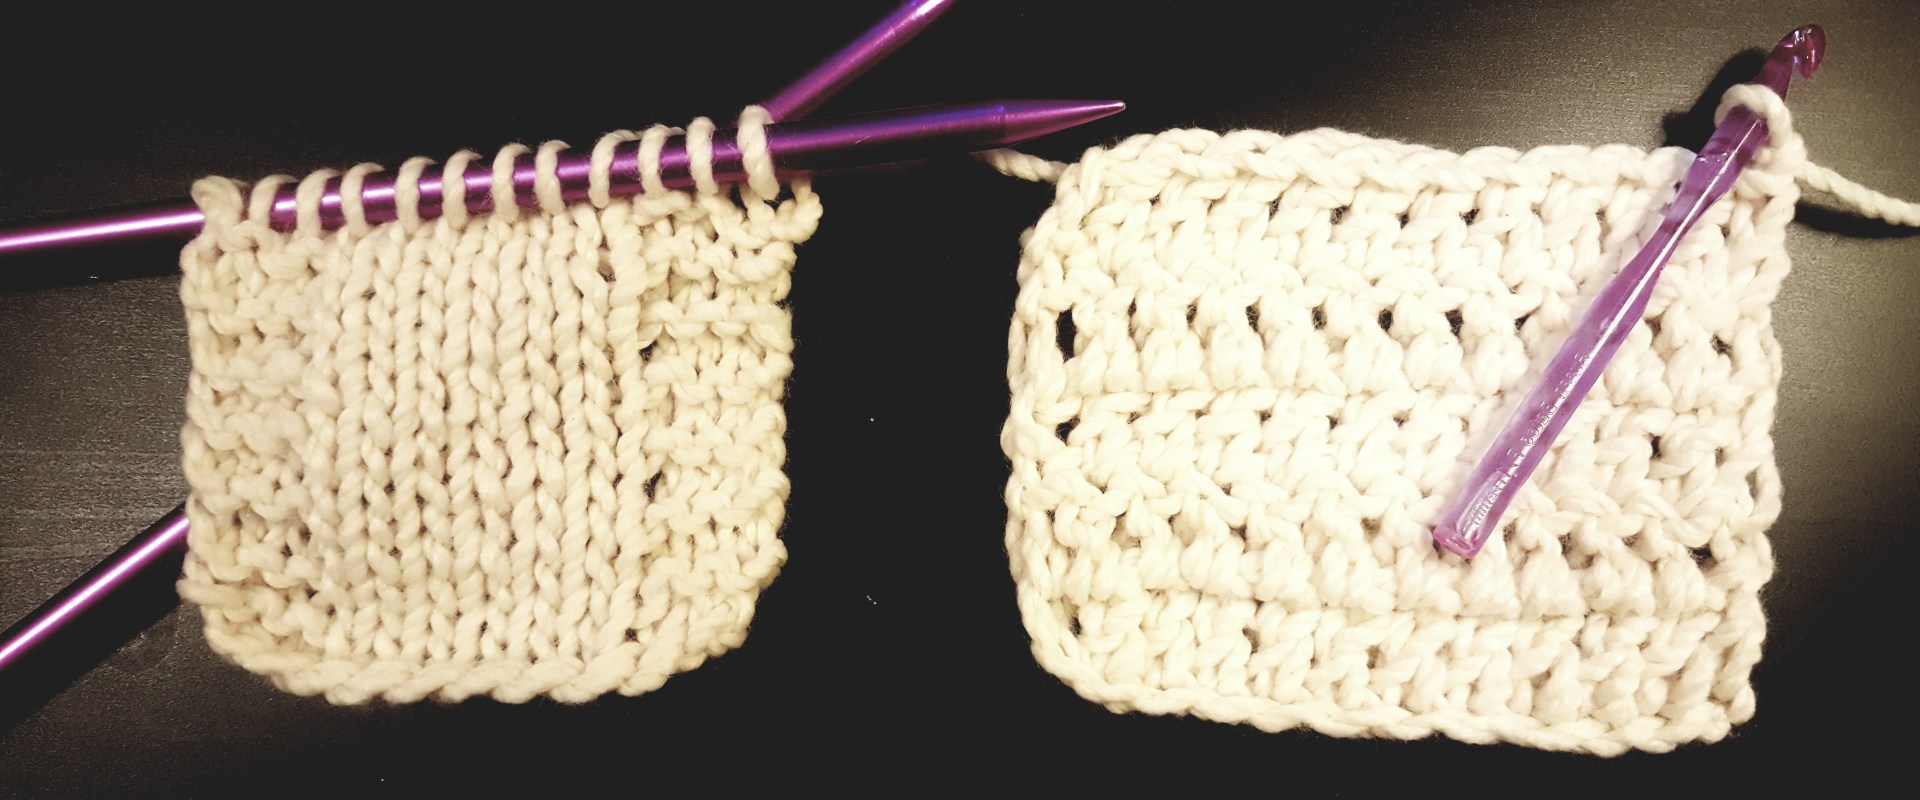 Knitting vs Crocheting: Which is Harder and Which is Easier?